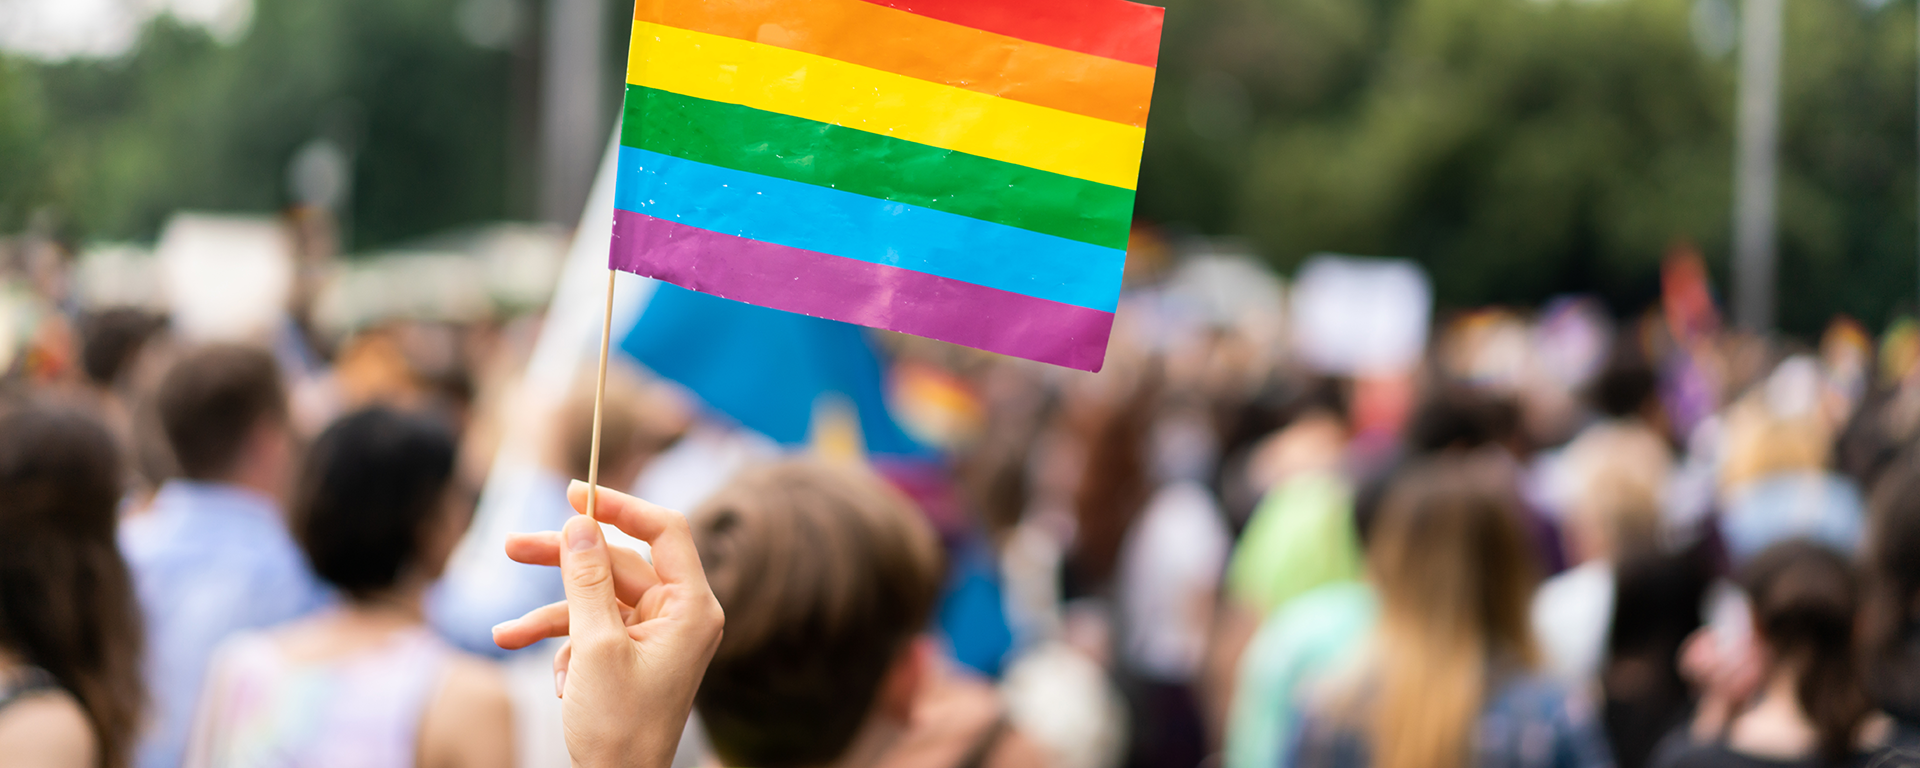 A hand holding a rainbow flag stands out in focus against a crowd of people in the background